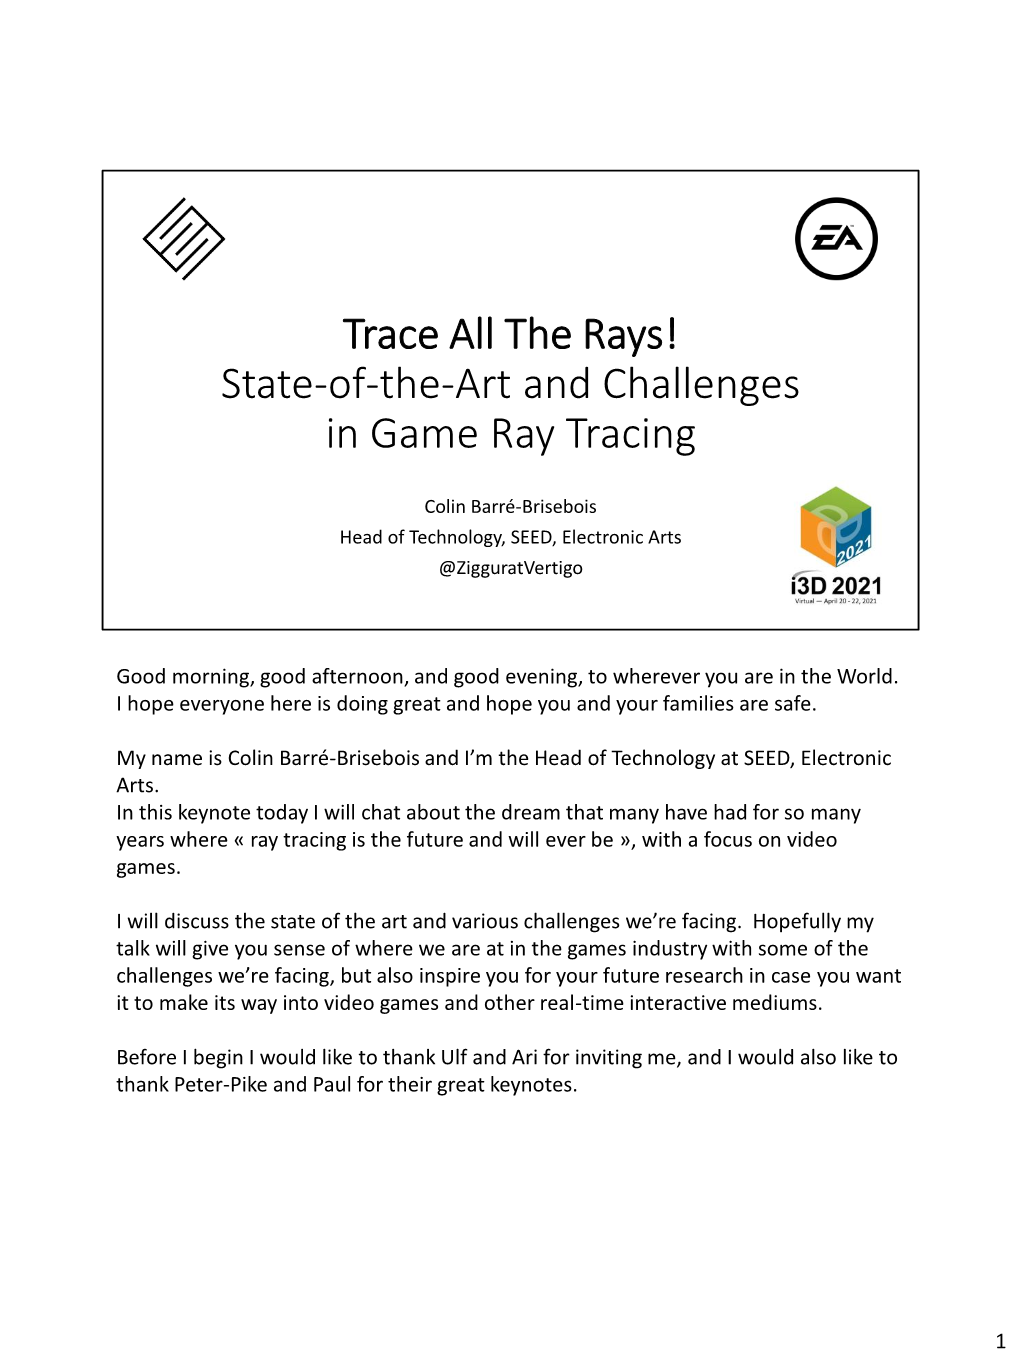 Trace All the Rays! State-Of-The-Art and Challenges in Game Ray Tracing